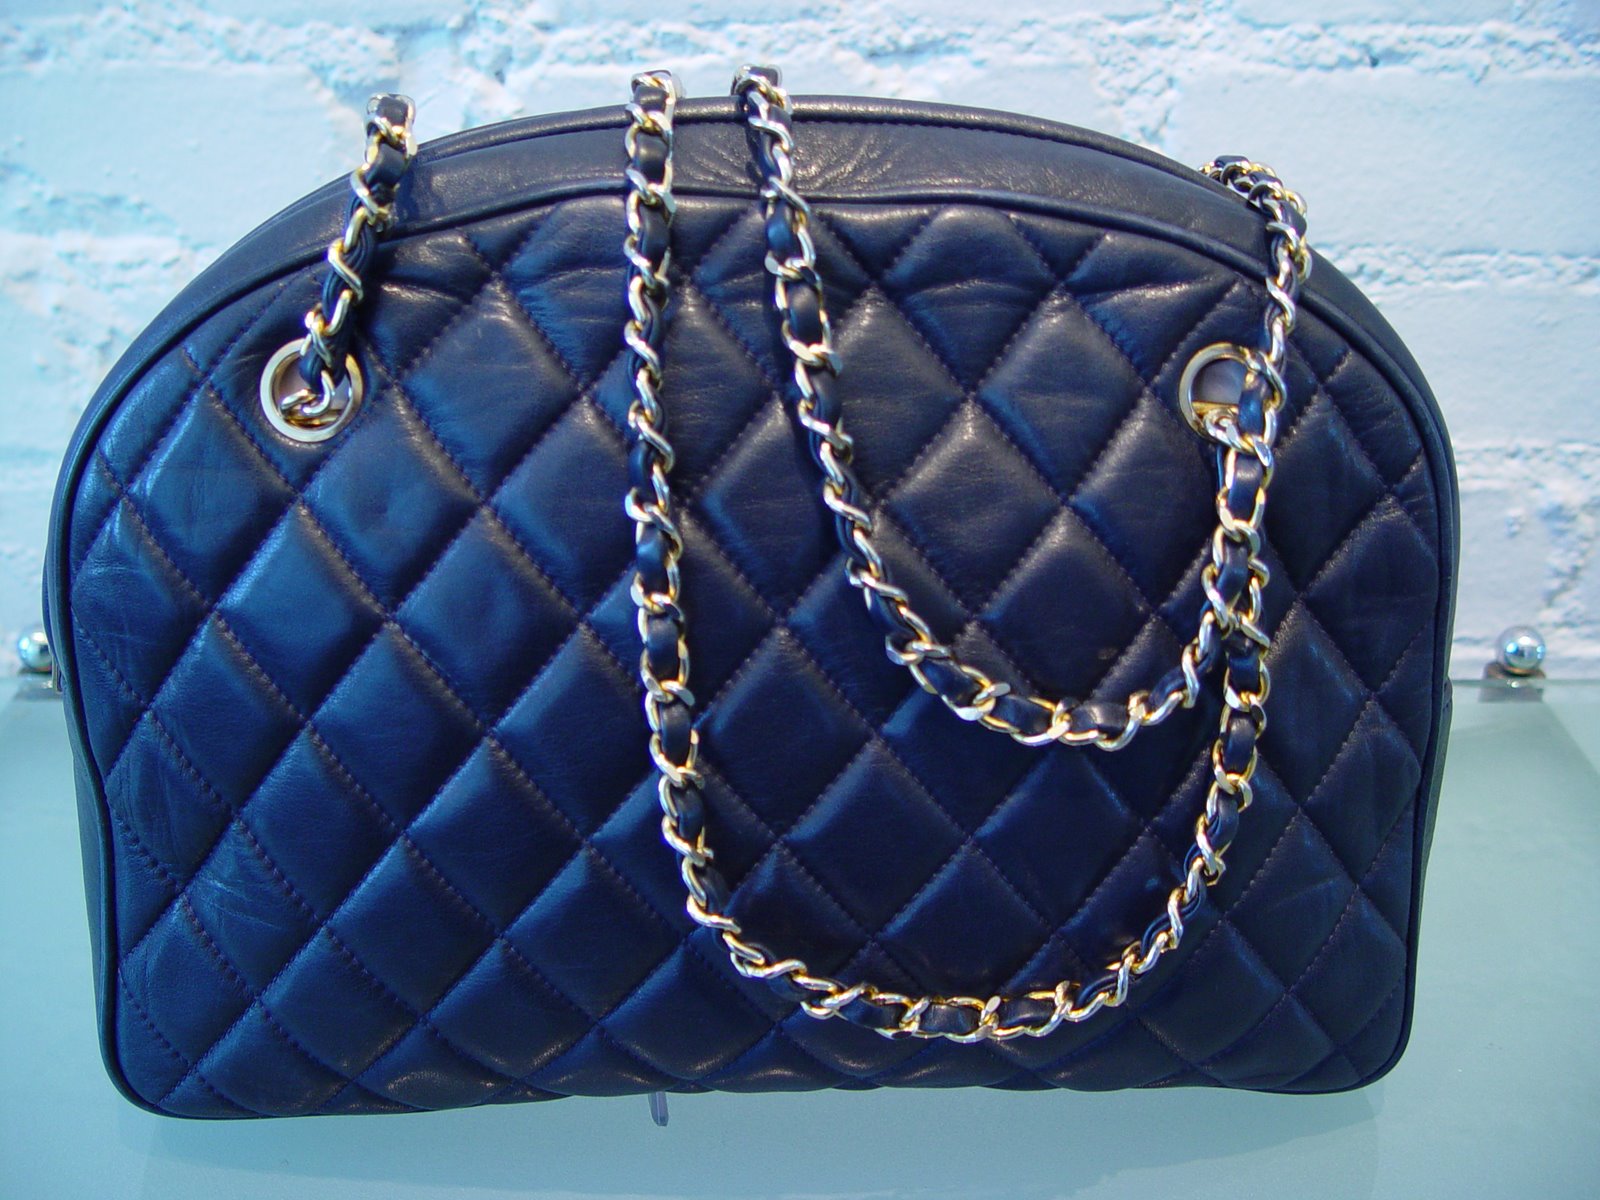 [NAVY+DIAMOND+QUITLED+LEATHER+ARC+SHAPED+BAG+C+EARLY+80S+MISSING+ZIPPER+TASSLE+9+BY+12+BY+3.JPG.JPG]